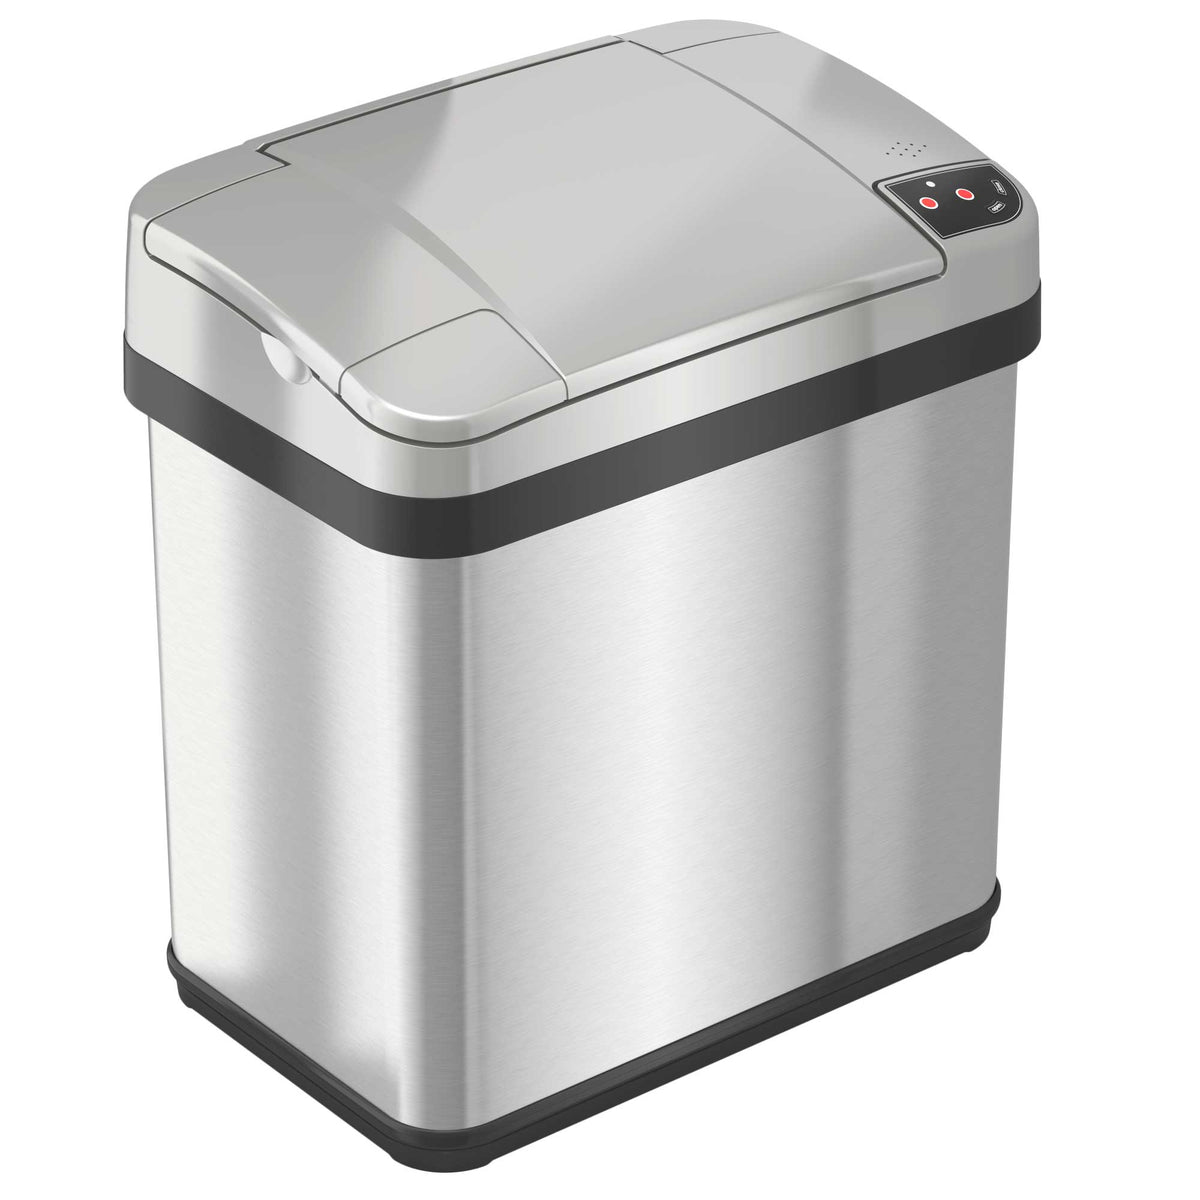 iTouchless 2.5 Gallon / 9.5 Liter Stainless Steel Sensor Bathroom Trash Can with Odor Filter and Lemon Fragrance